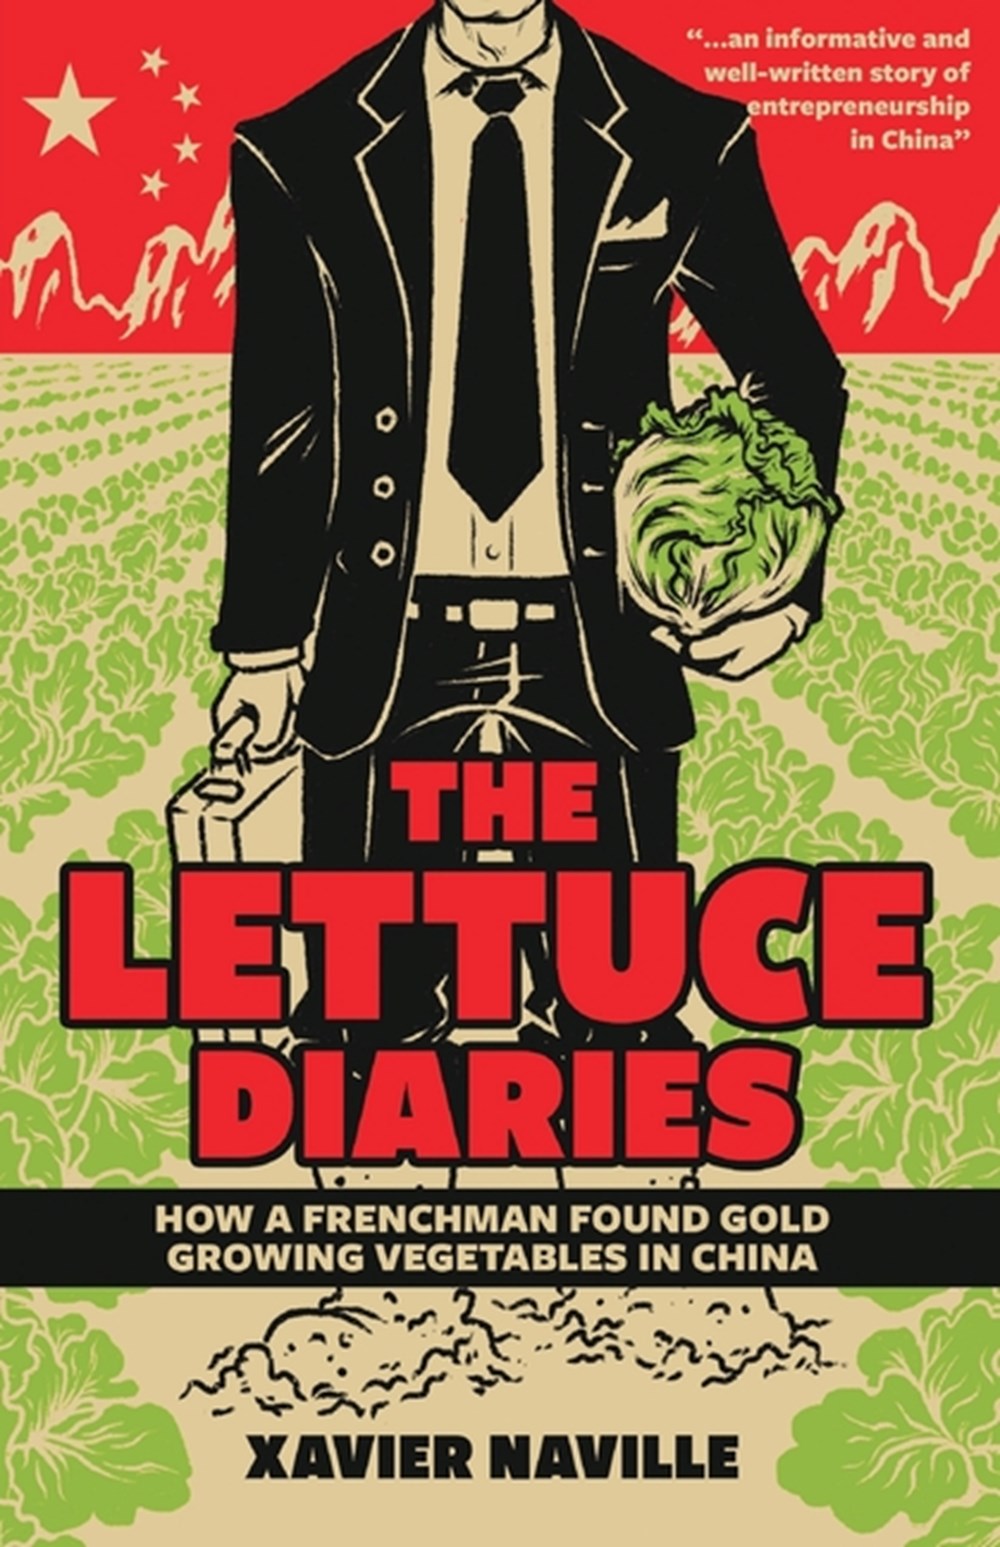 Lettuce Diaries: How A Frenchman Found Gold Growing Vegetables In China